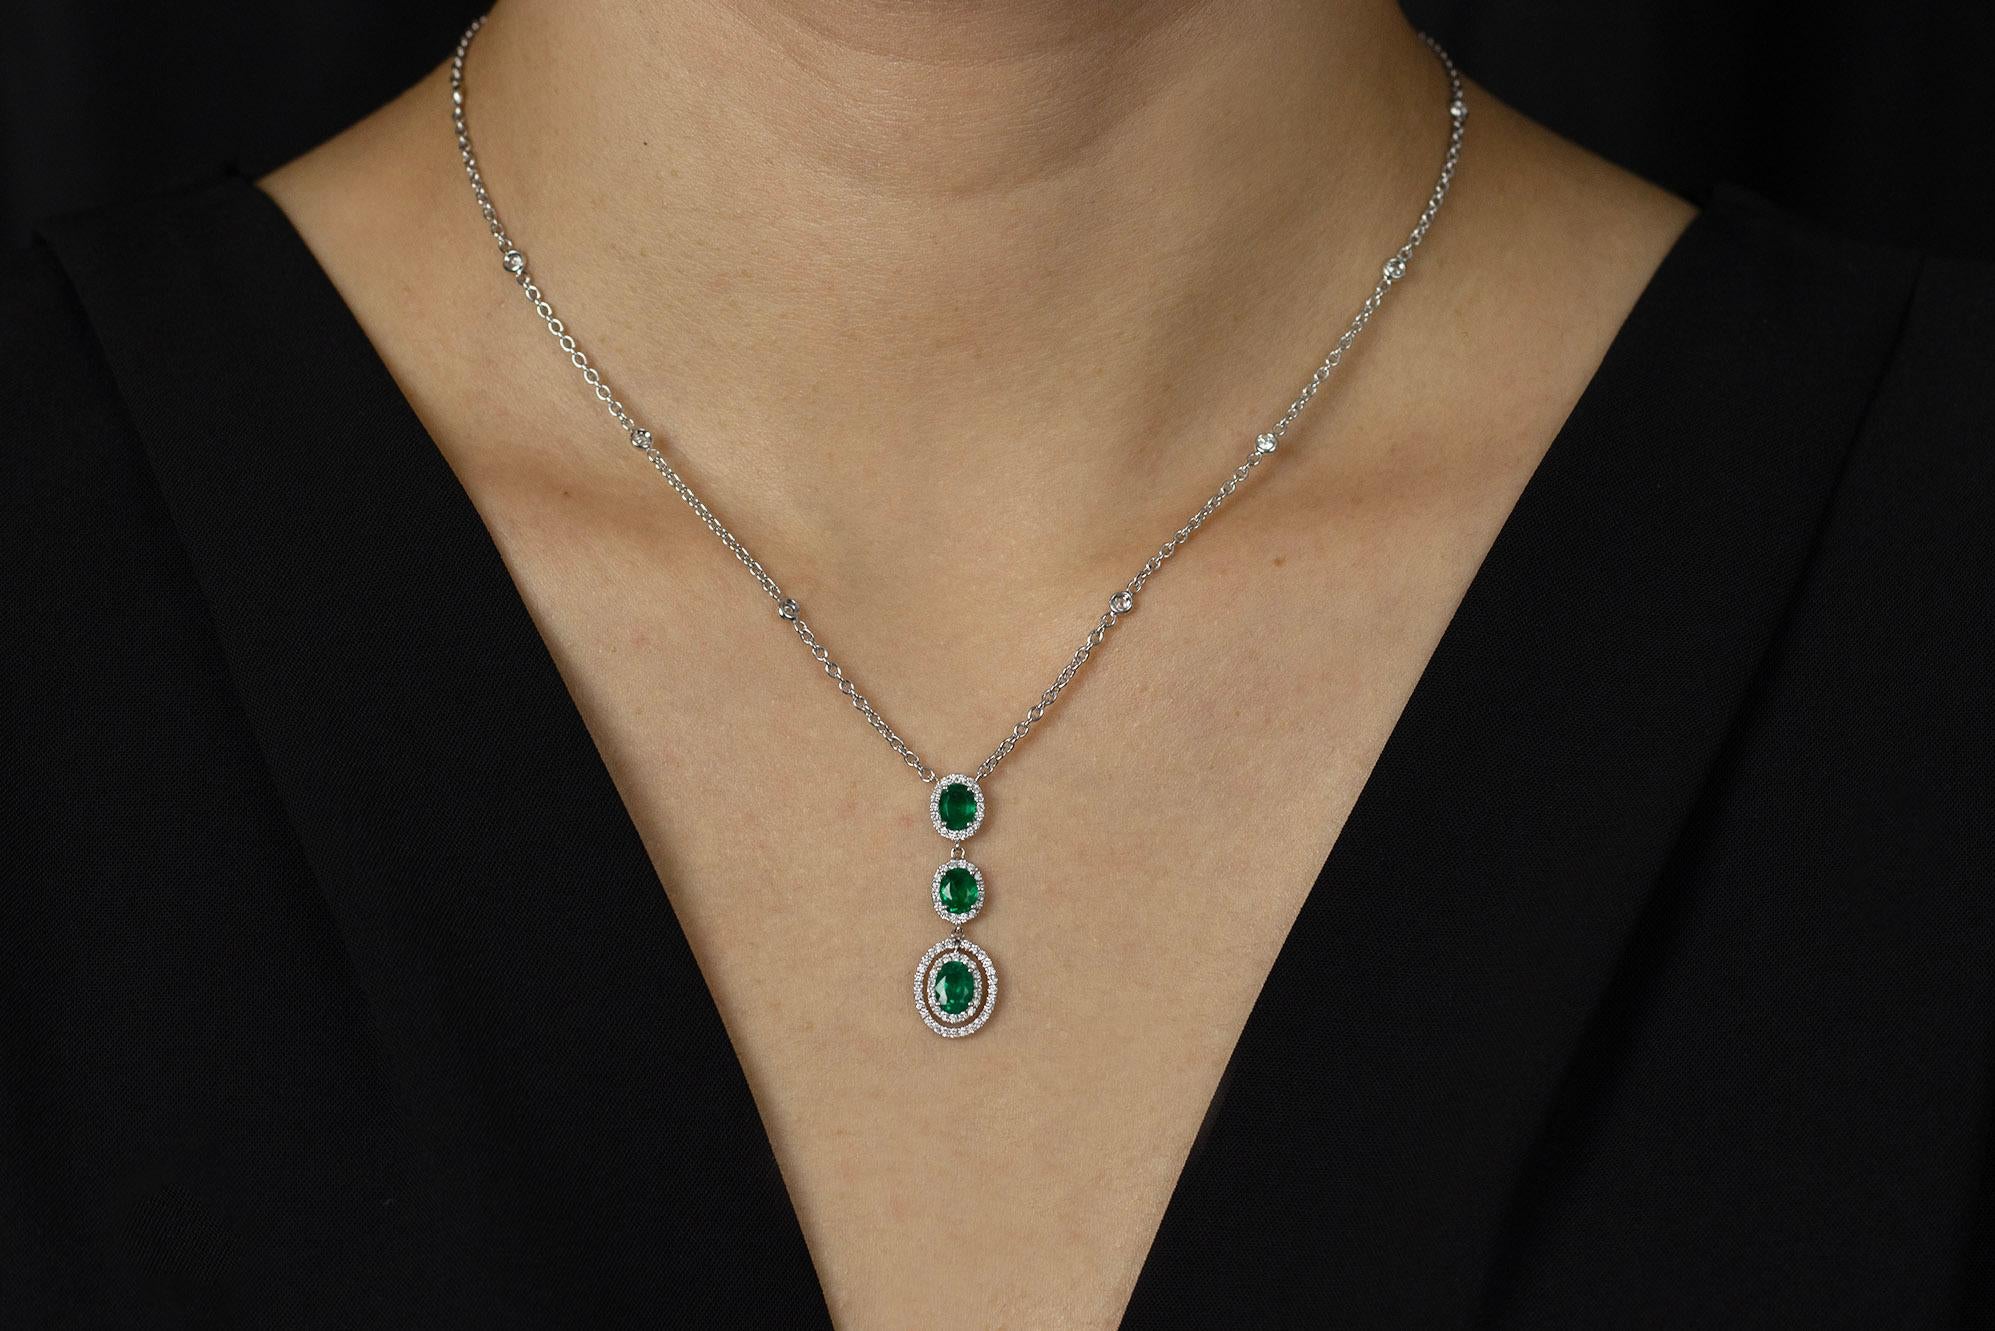 Roman Malakov 1.28 Carat Oval Cut Emerald with Diamond Halo Pendant Necklace  In New Condition For Sale In New York, NY